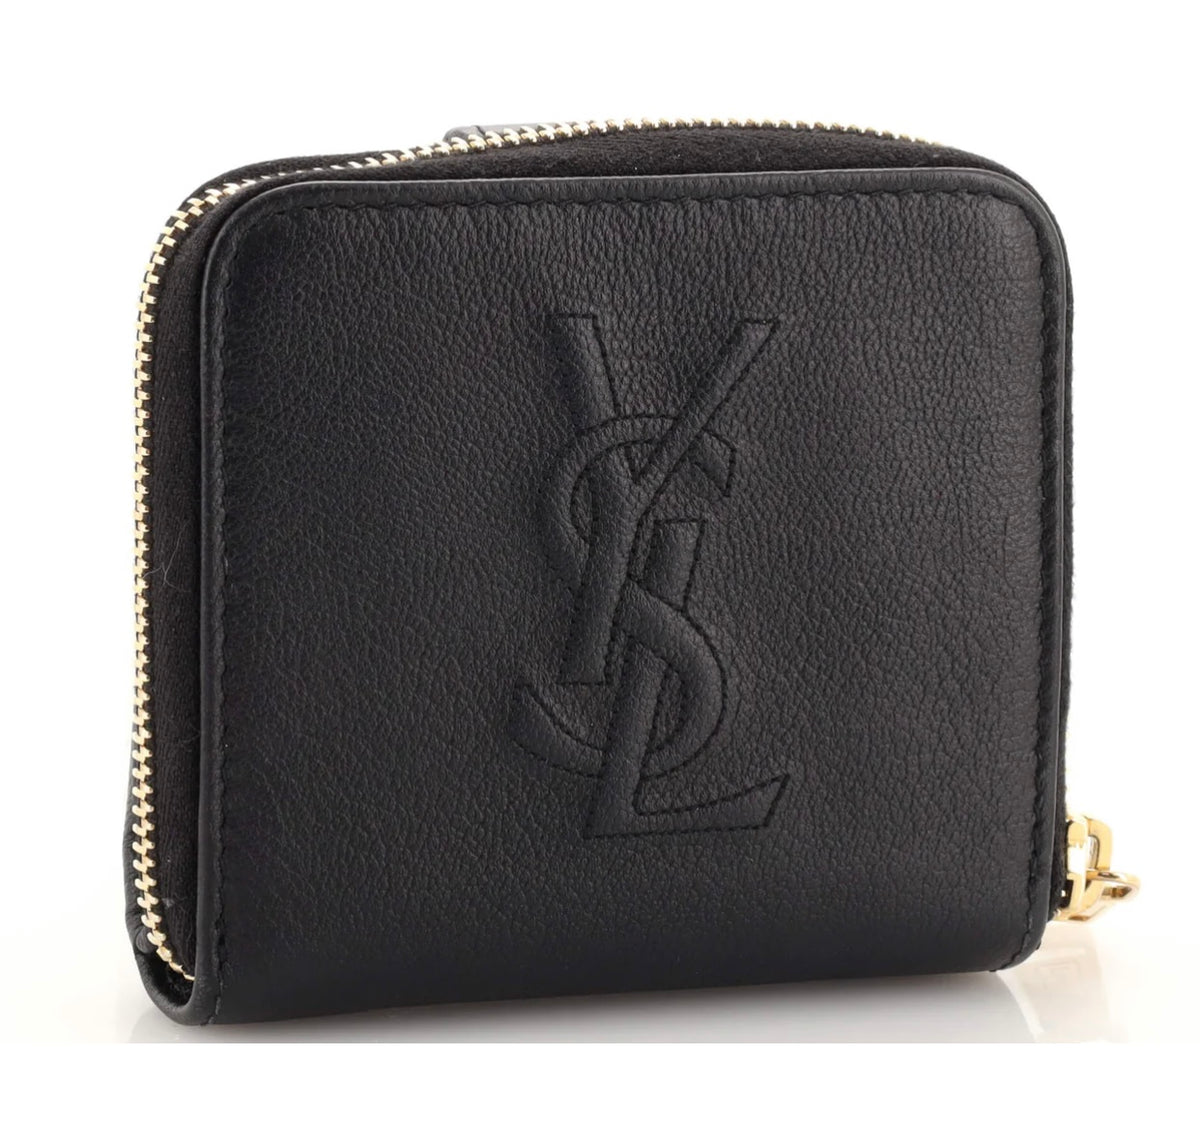 Louis Vuitton - Authenticated Zippy Wallet - Leather Black for Women, Very Good Condition